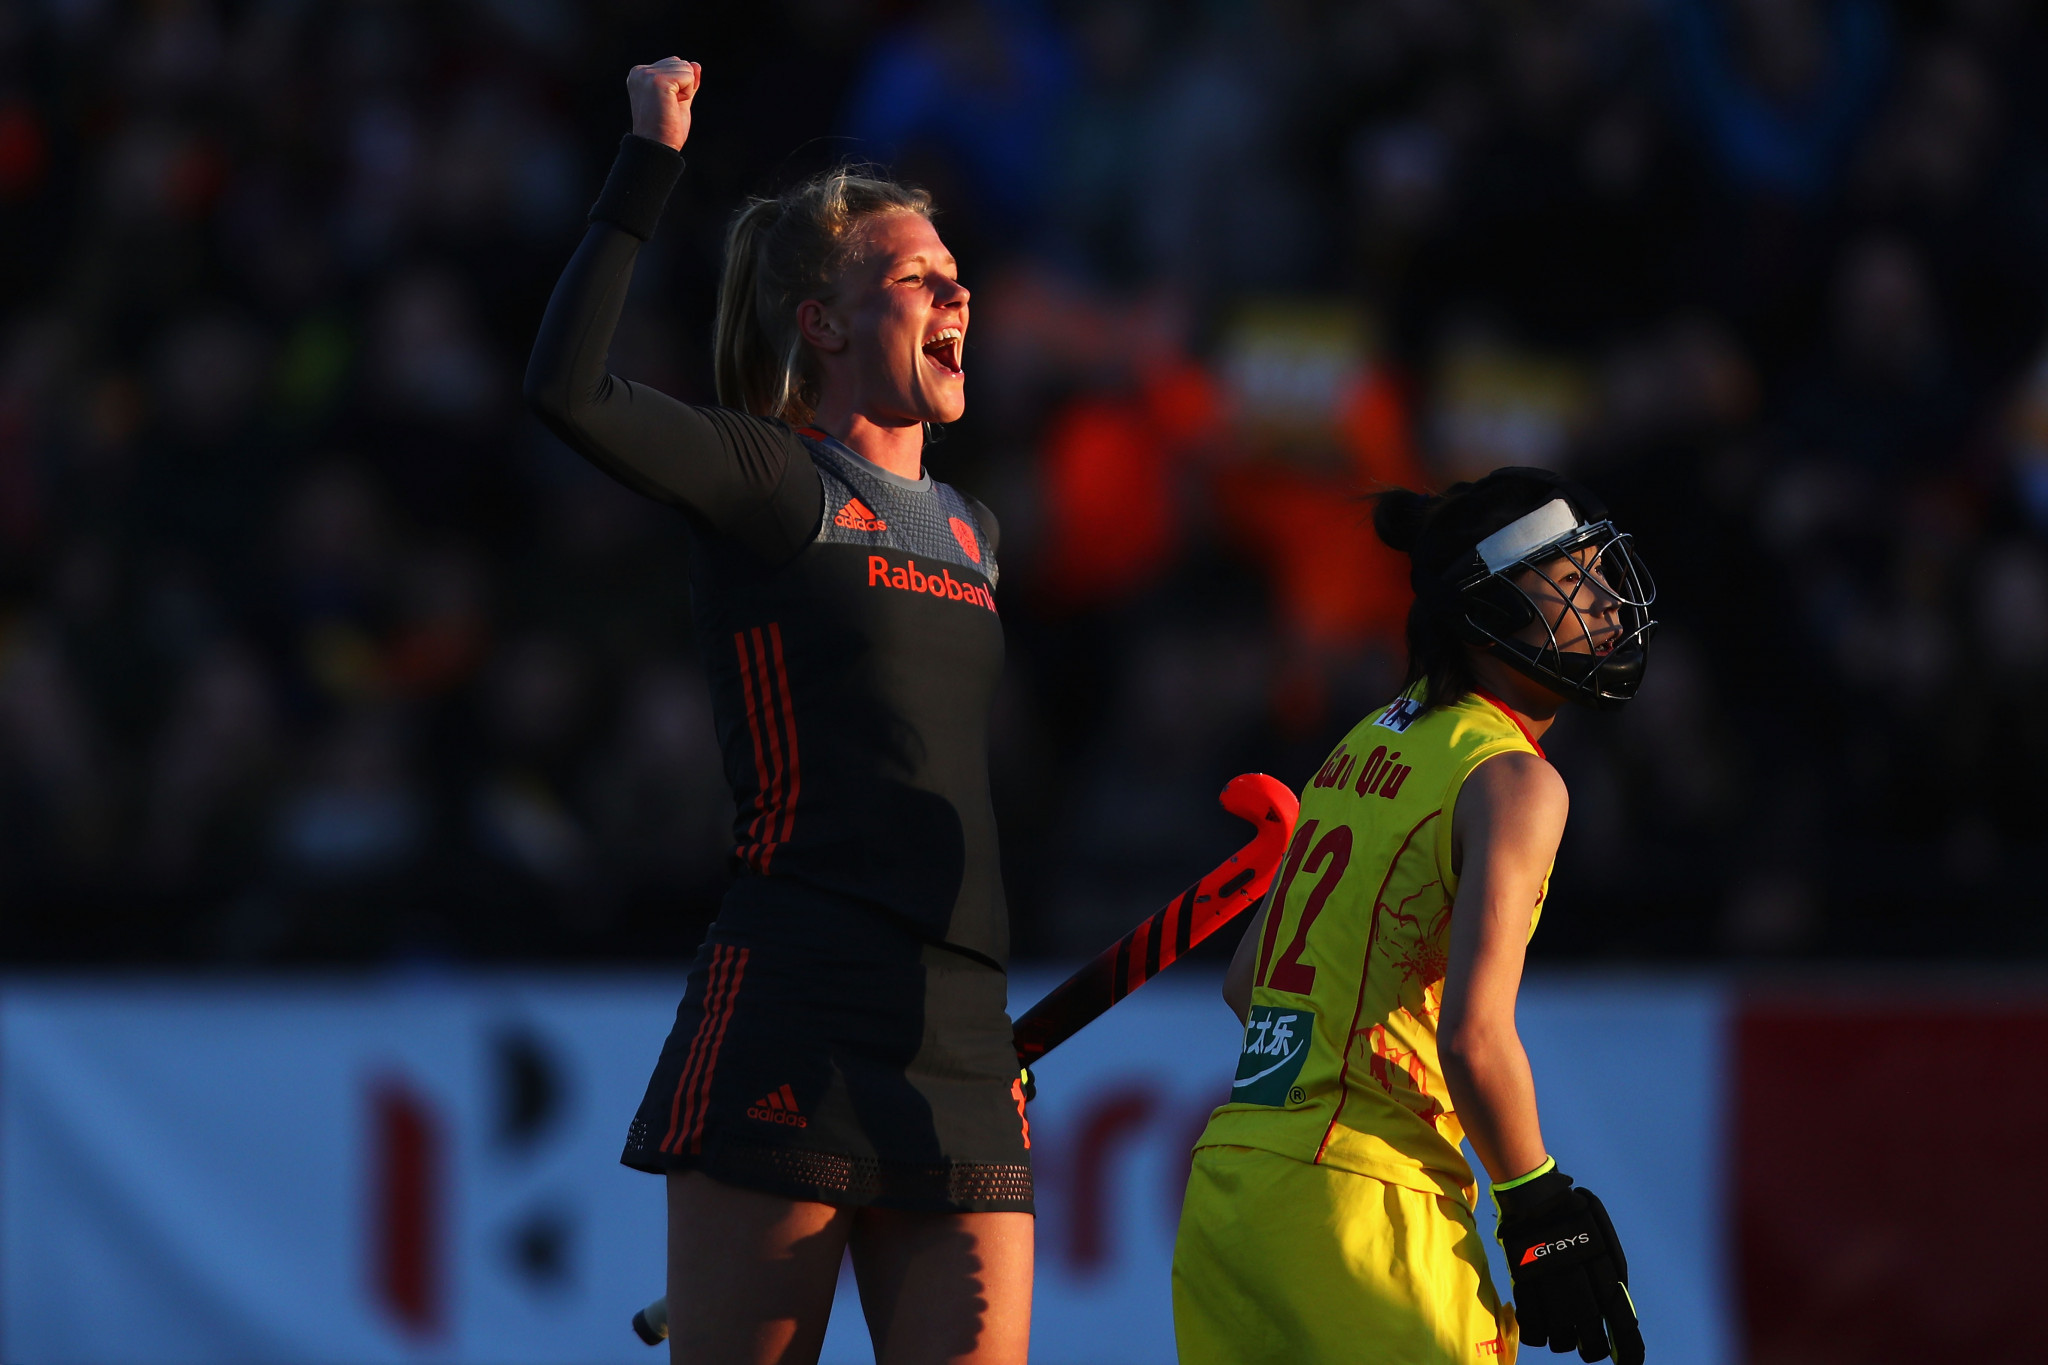 Caia van Maasakker celebrates scoring one of her three goals against China ©Getty Images